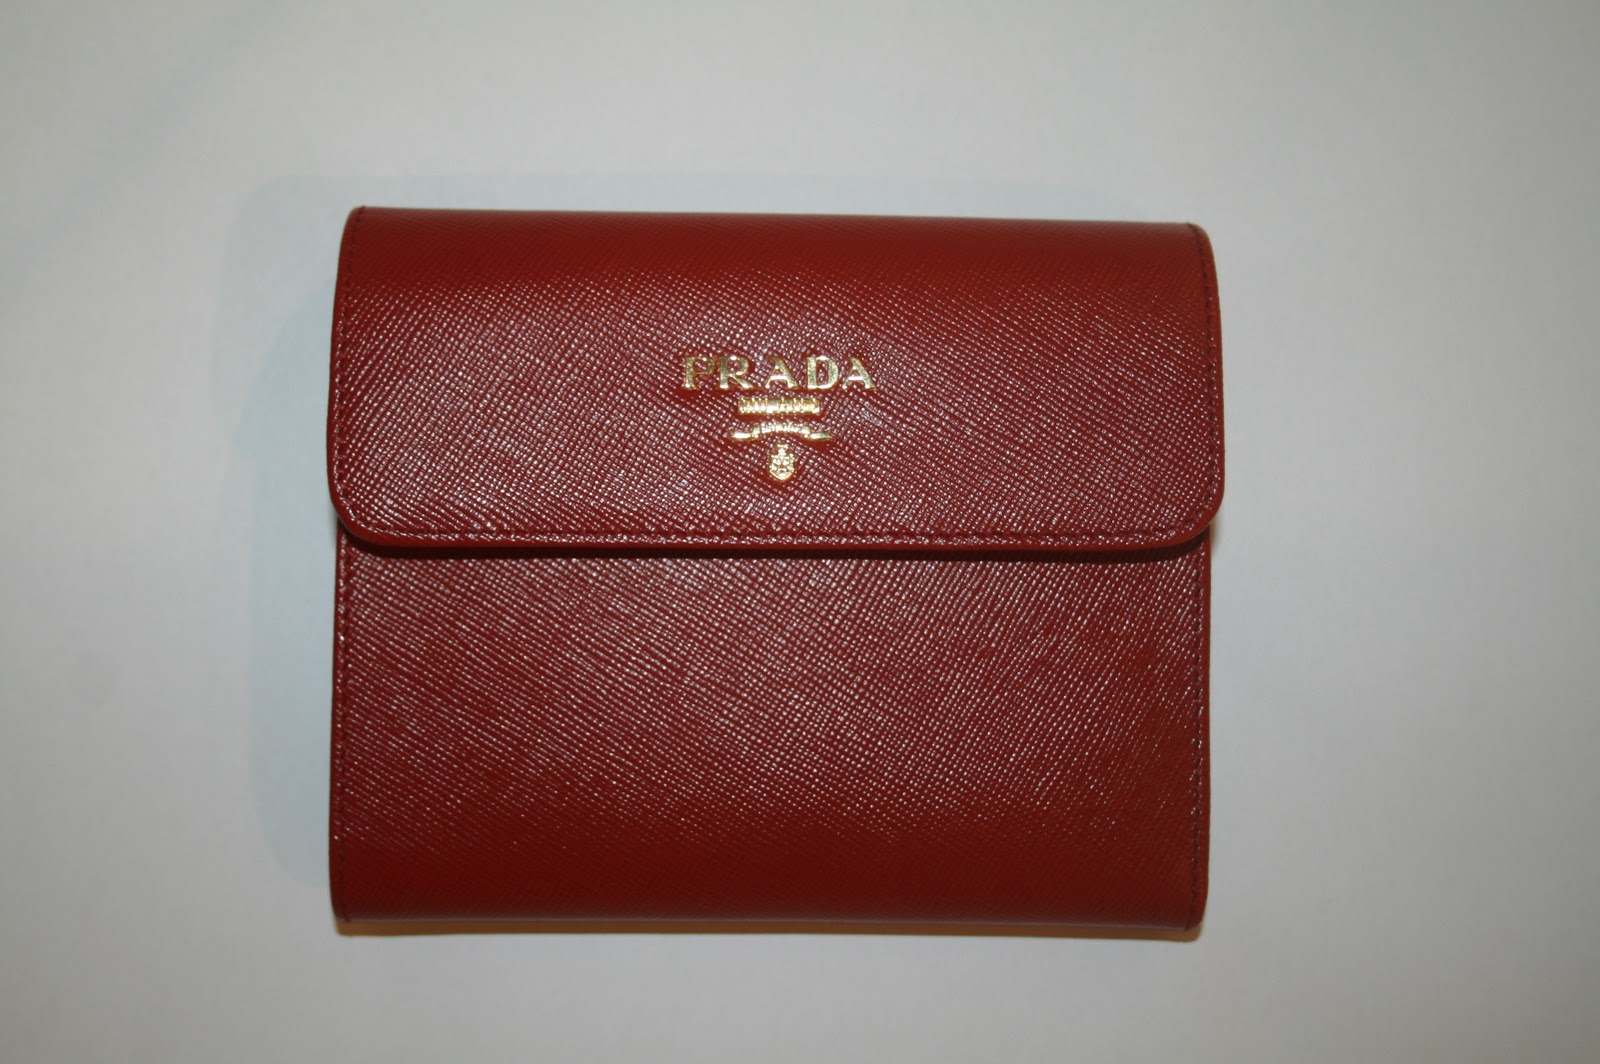 D.LUX SHOP: Our collections of Prada wallets